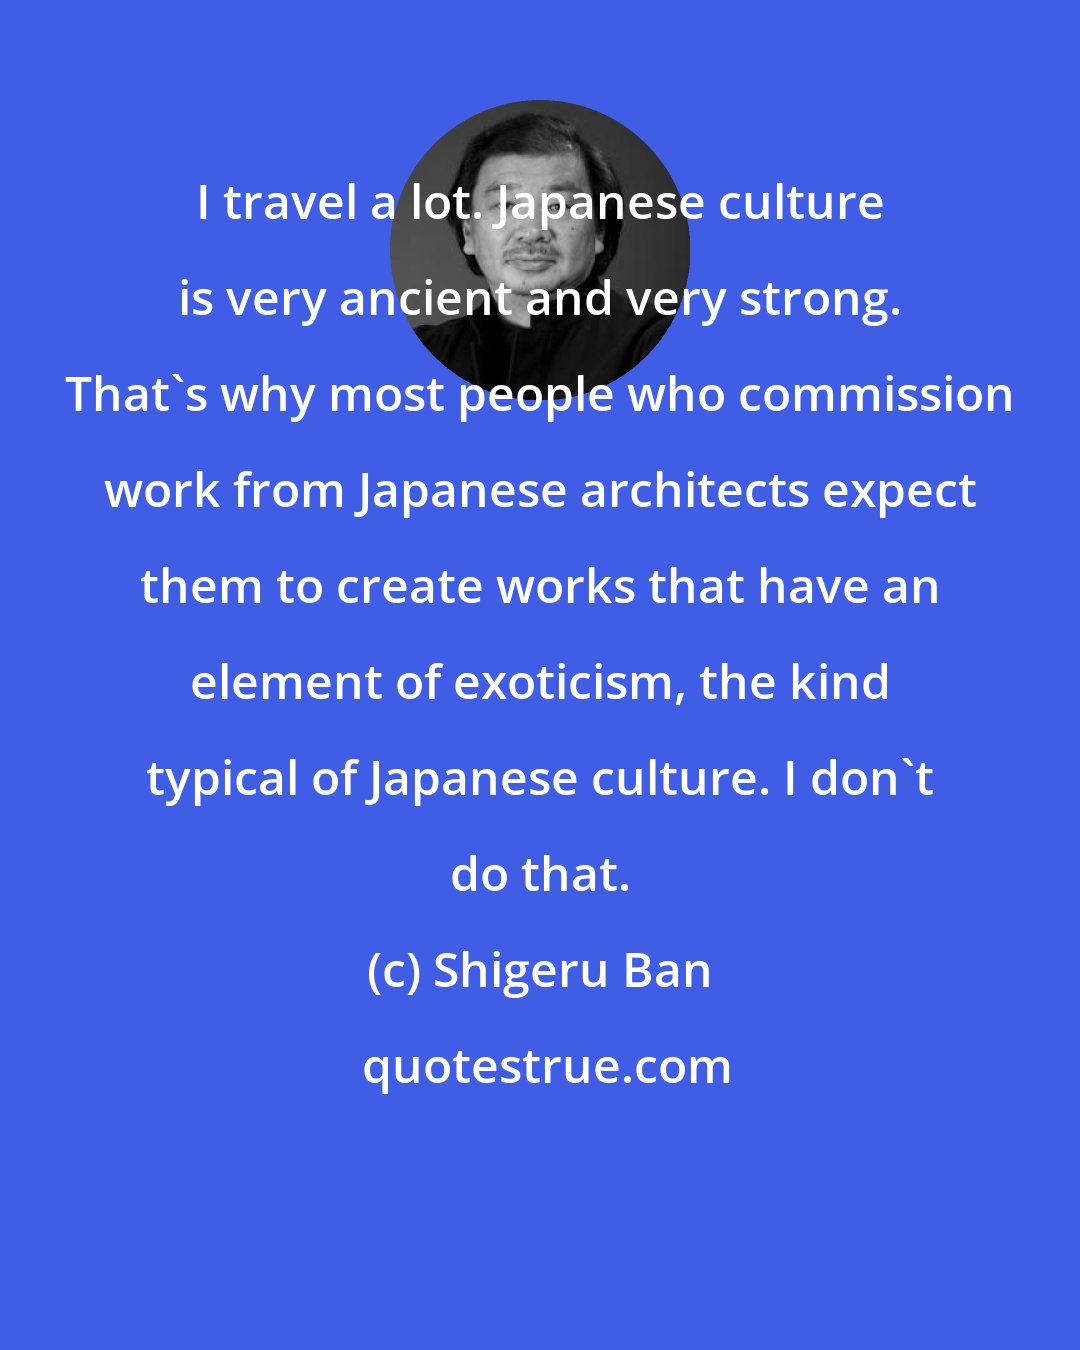 Shigeru Ban: I travel a lot. Japanese culture is very ancient and very strong. That's why most people who commission work from Japanese architects expect them to create works that have an element of exoticism, the kind typical of Japanese culture. I don't do that.